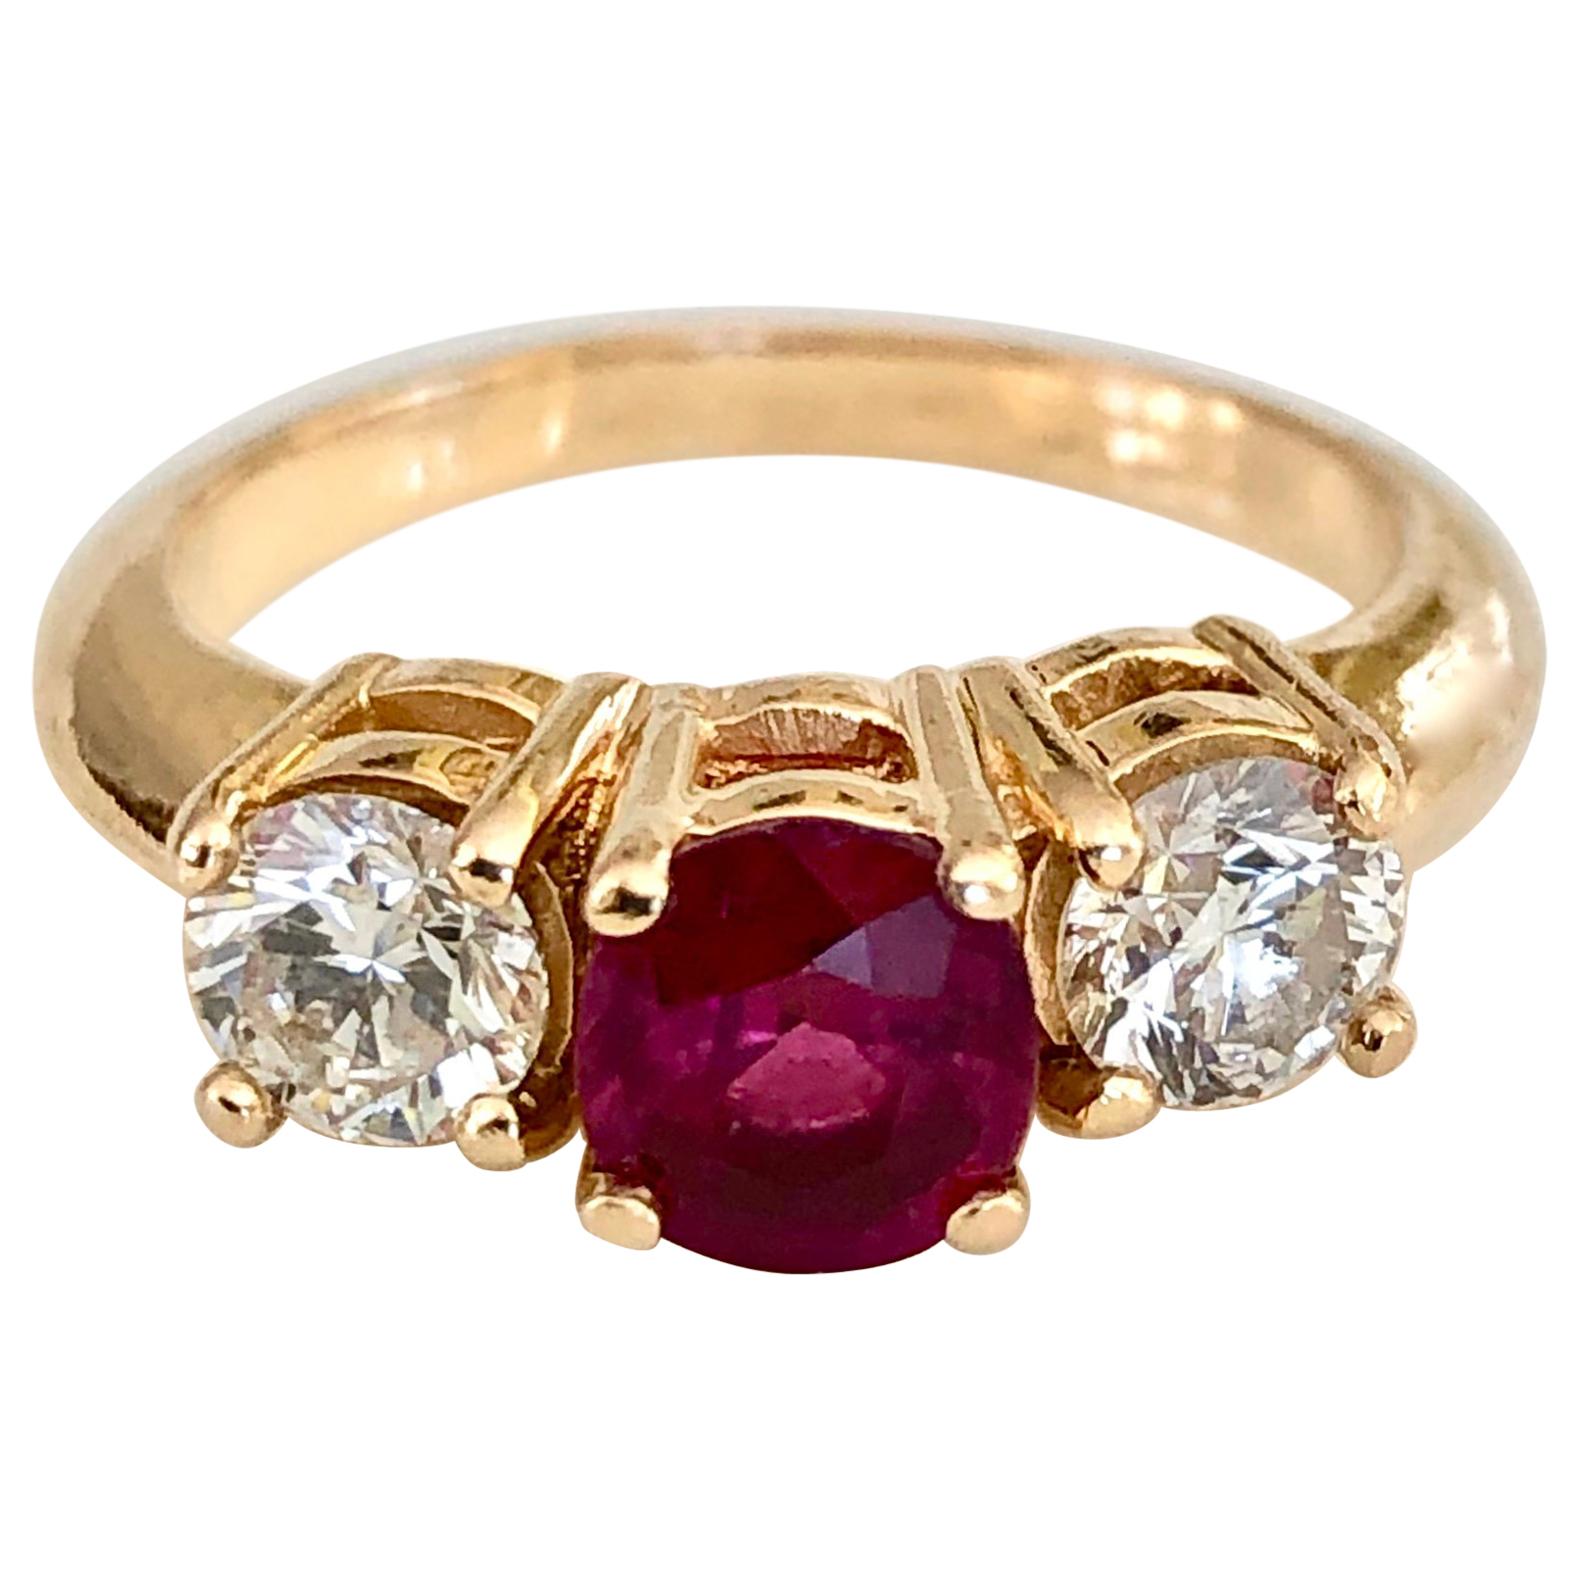 A classic trilogy engagement ring stars a natural deep, rich red ruby weighing 1.04 carat flanked by a matched pair of brilliant-cut diamonds G-H/SI1 weighing over 0.70 carats. This elegant ring is crafted in a timeless, traditional style of 18K